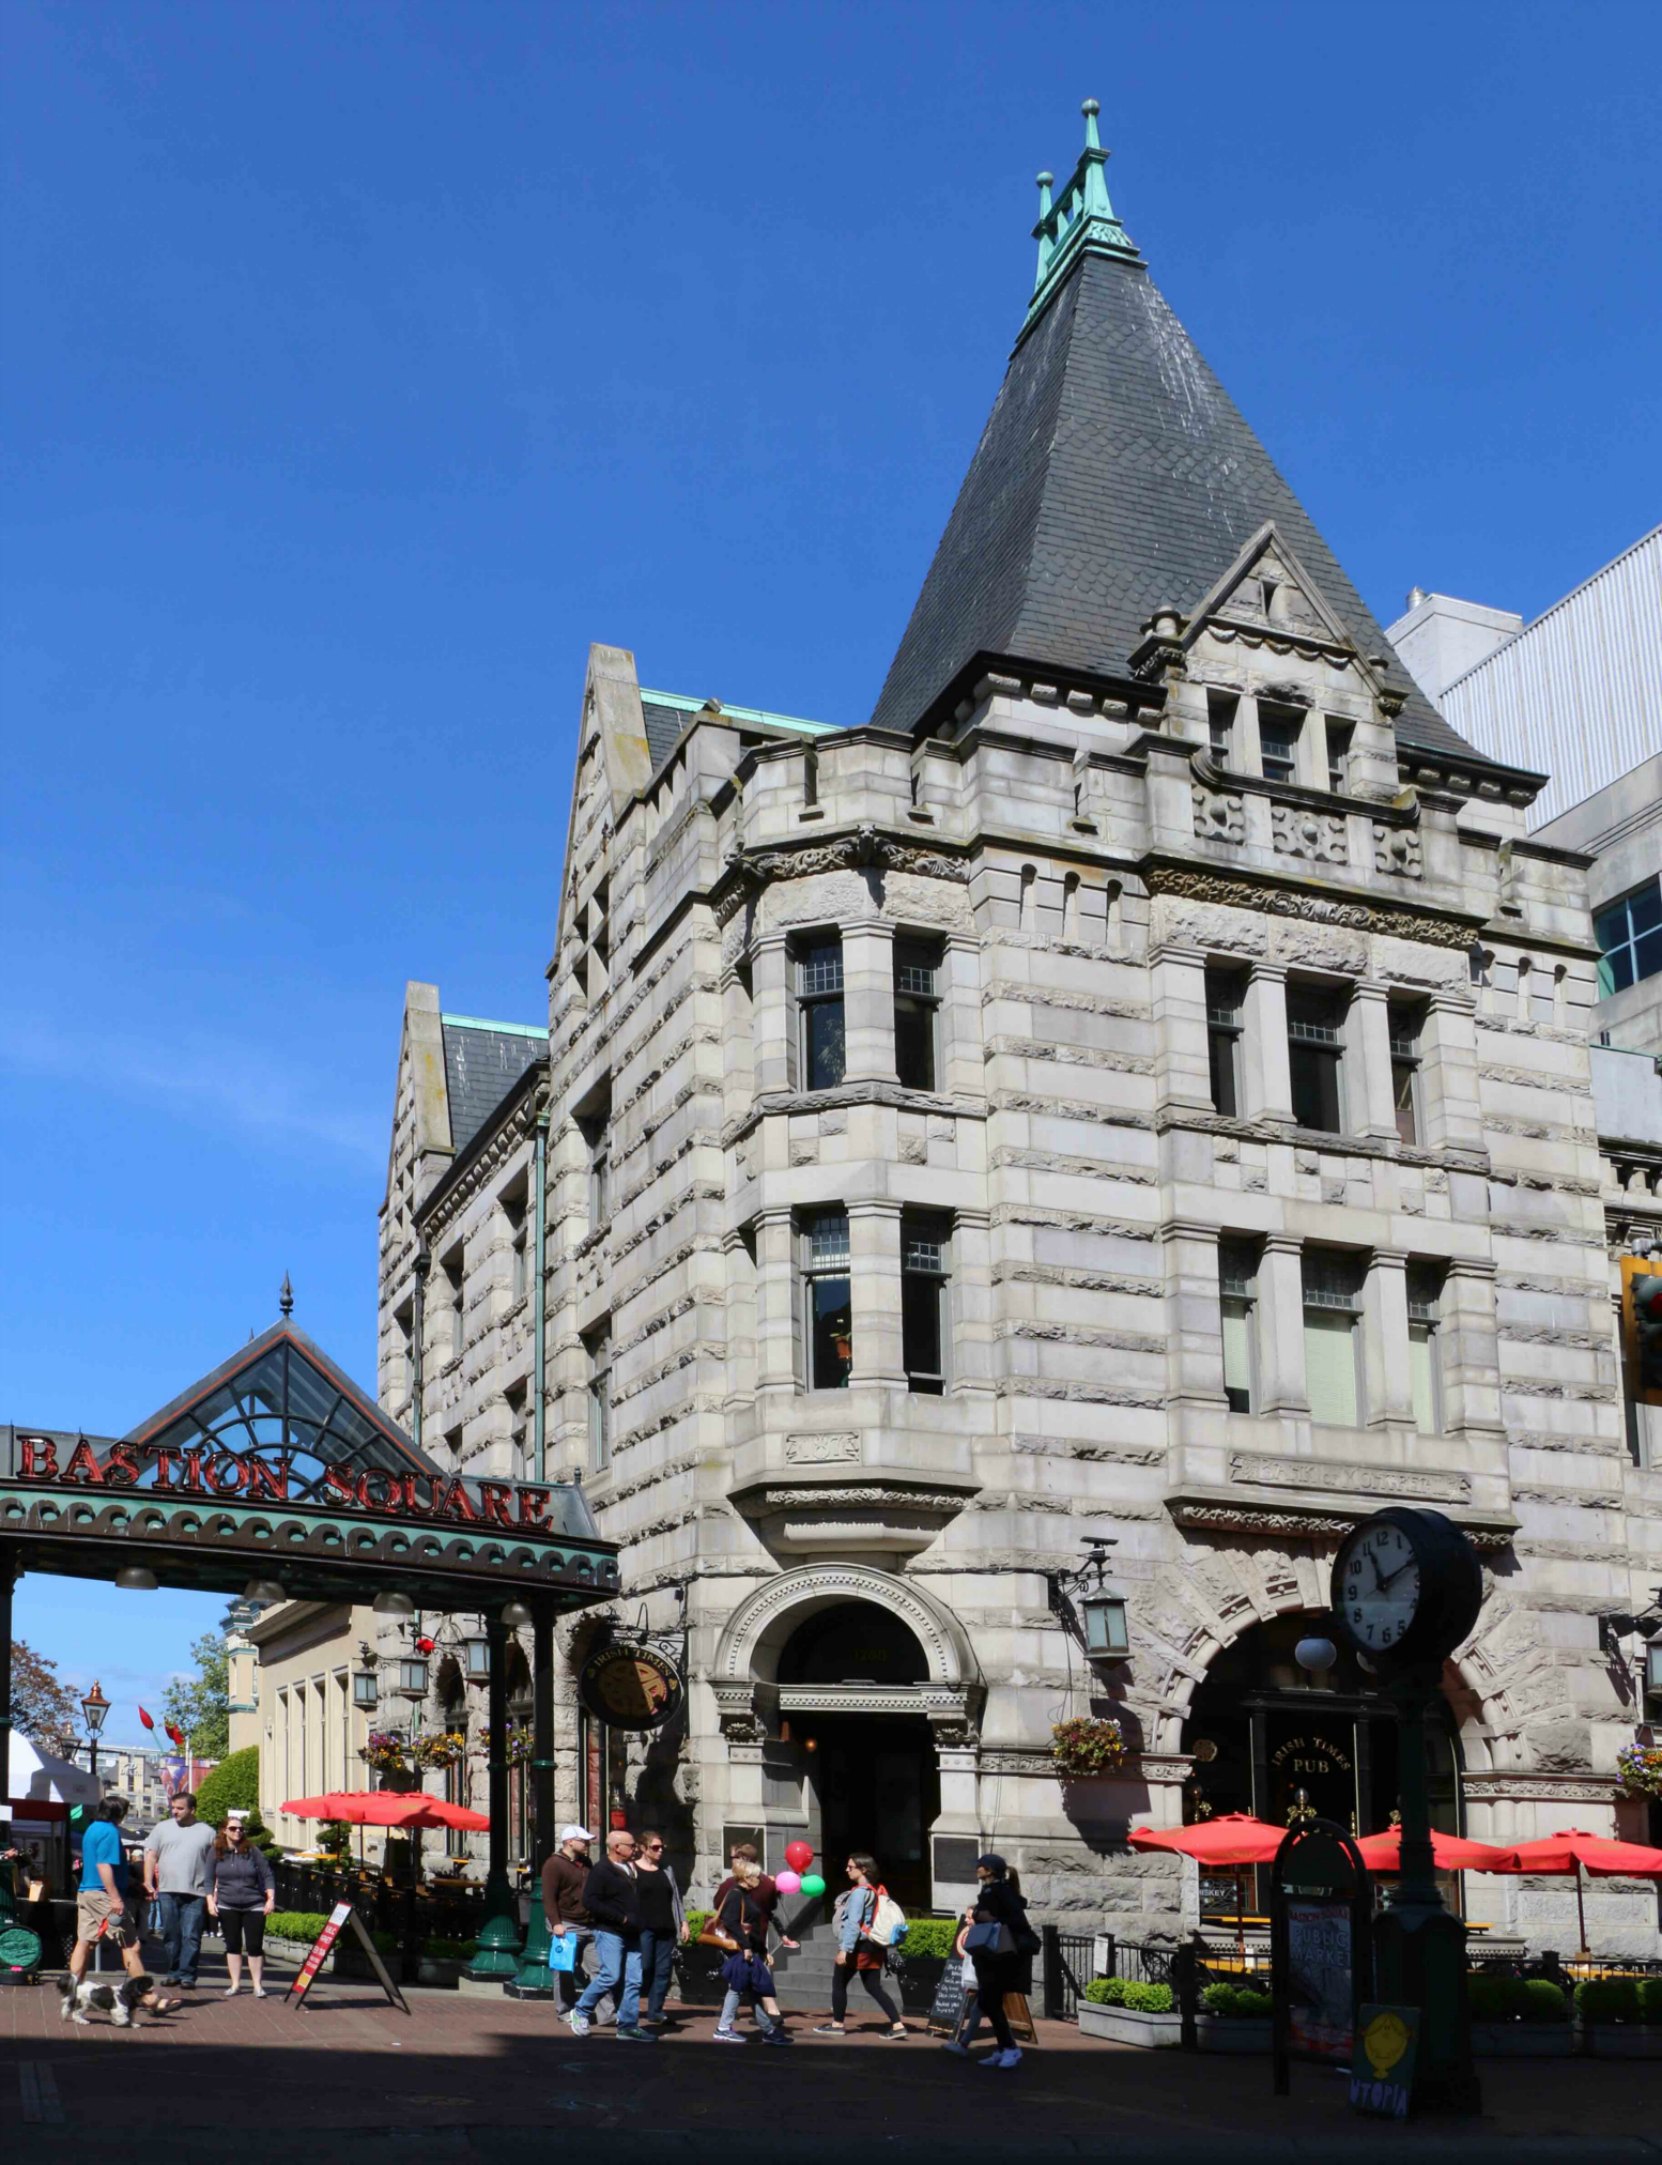 1200 Government Street, built in 1897 for the Bank of Montreal by architect Francis Rattenbury. It is now the Irish Times Pub. (photo by Victoria Online Sightseeing Tours)